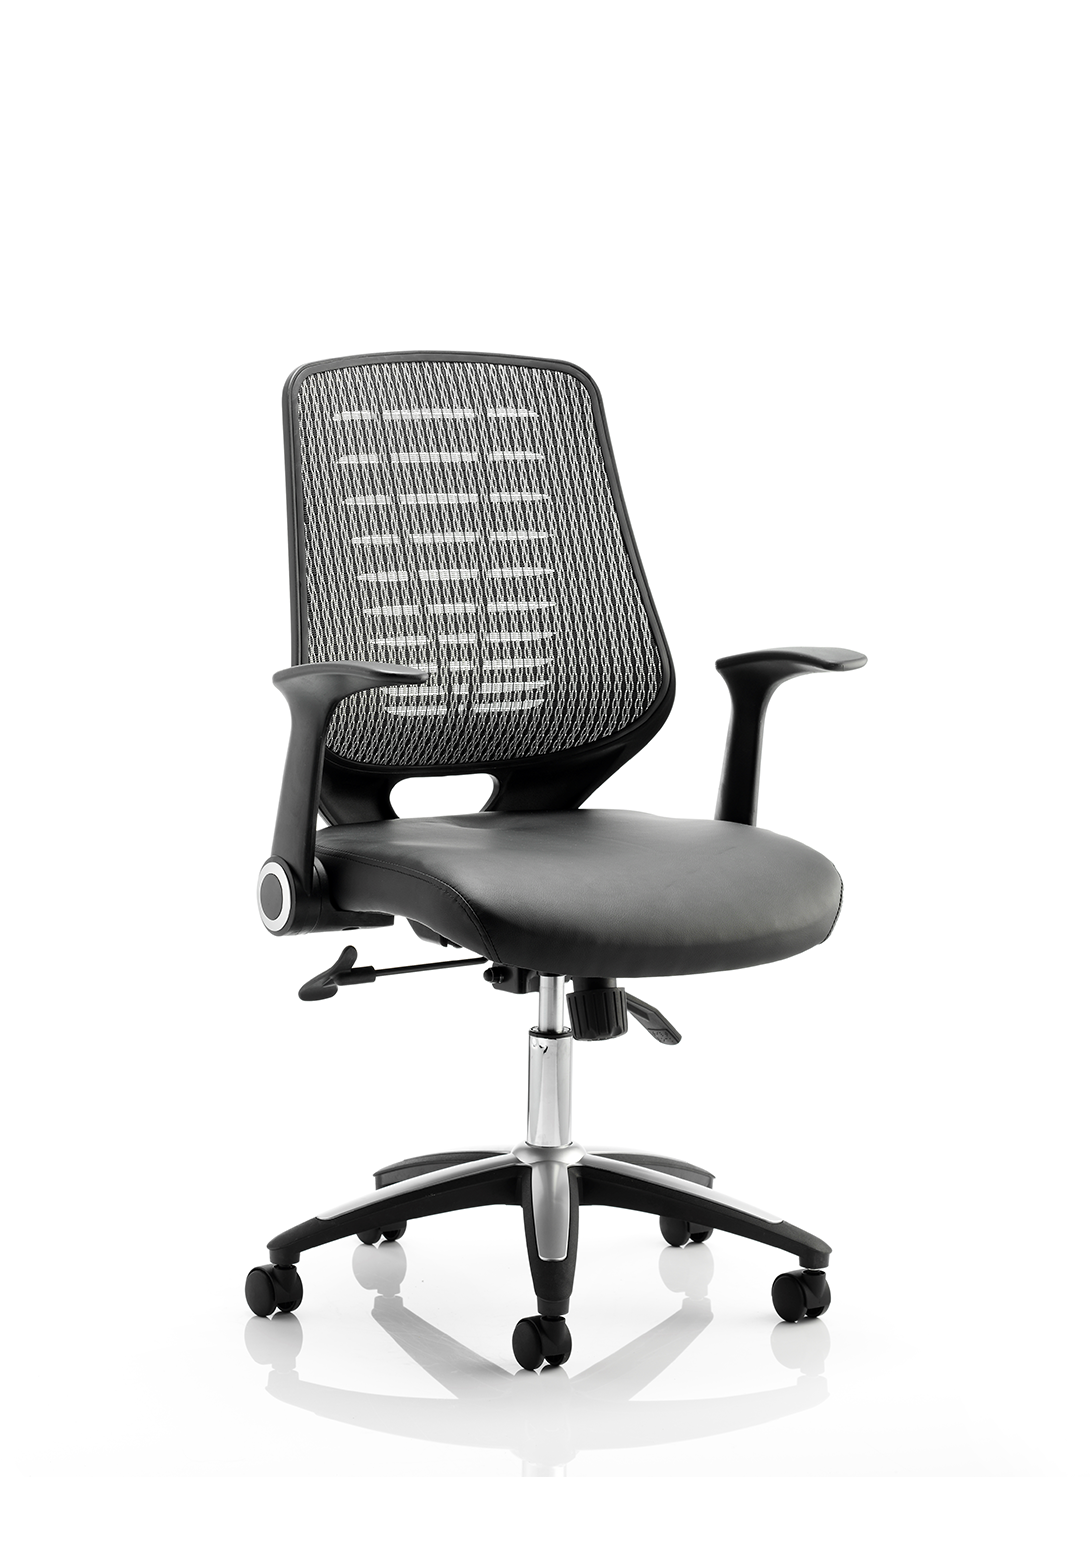 Relay Home Office Chair | Operator Chair | Task Chair | Home Office Furniture | Ergonomic Office Chair | Ergonomic Office Furniture